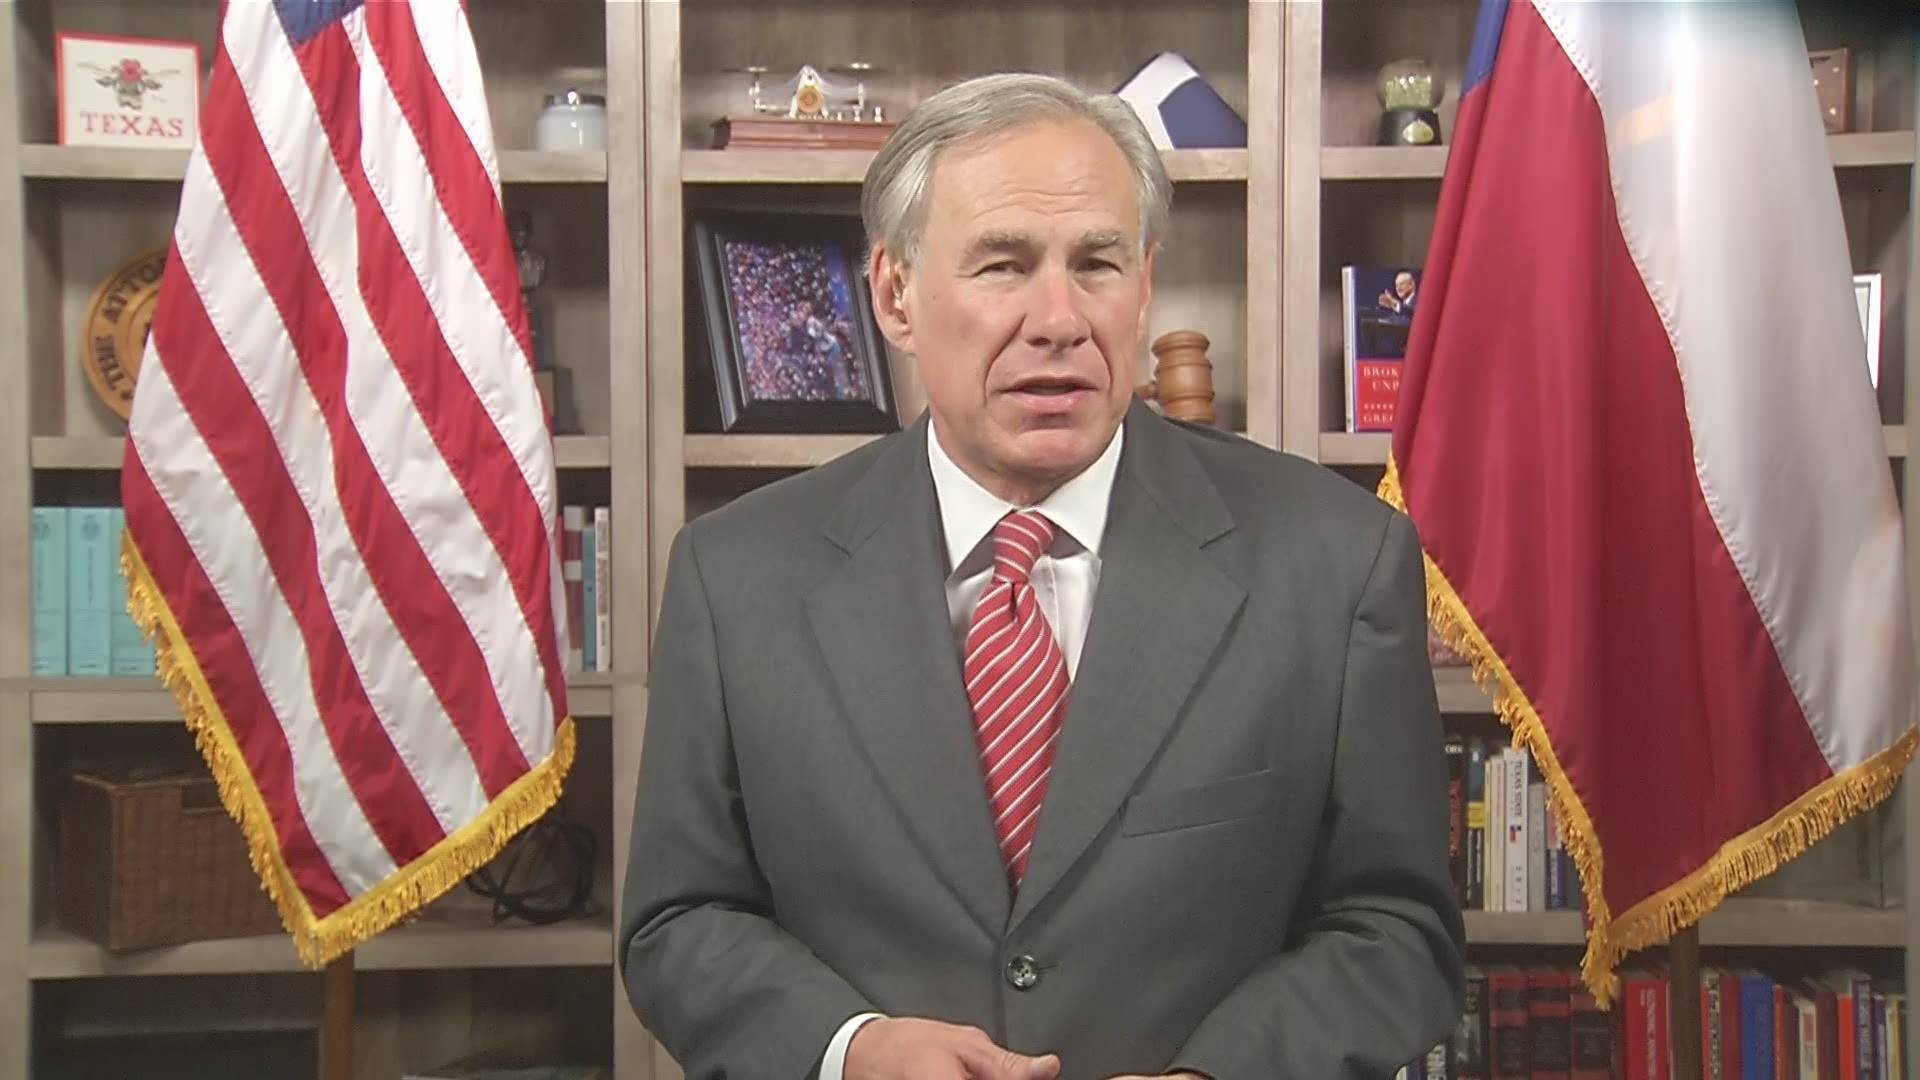 Texas Gov. Greg Abbott spoke with KHOU 11 about items in the special session and House Democrats leaving the state.